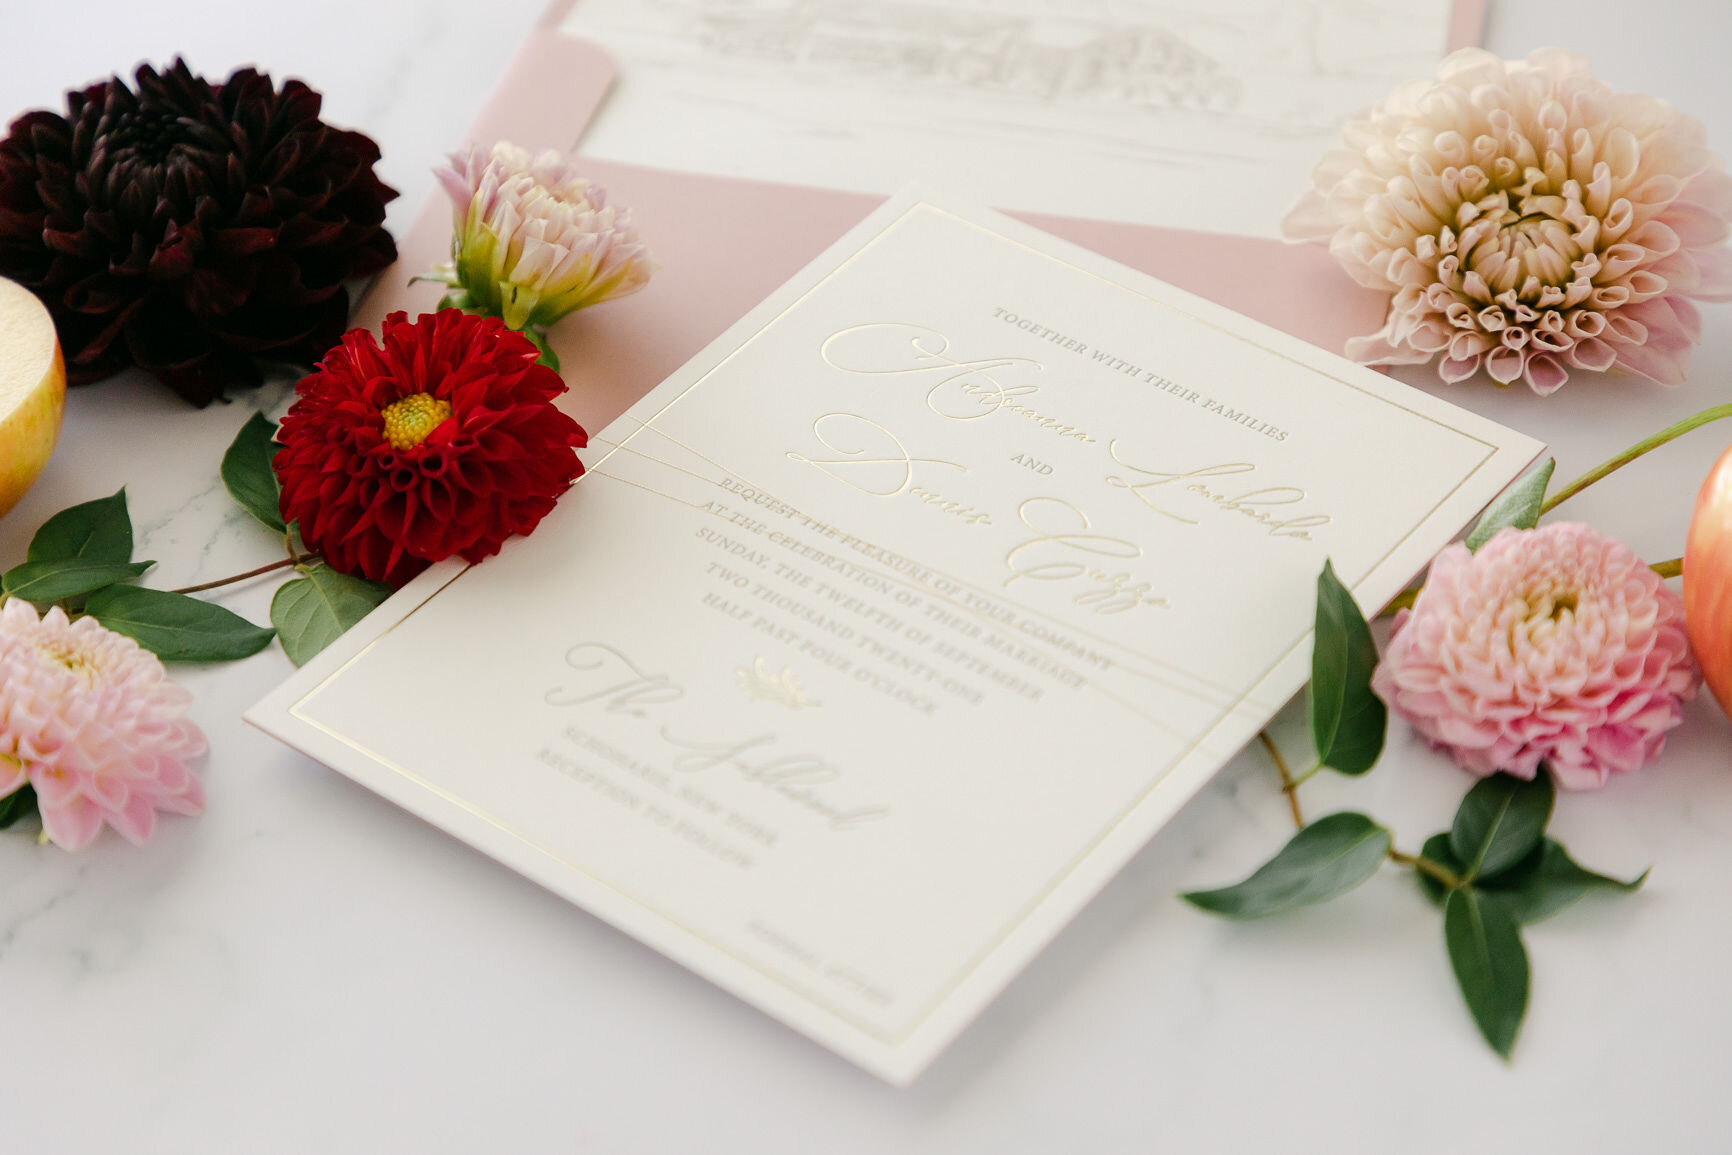 Custom letterpress and foil wedding invitation for The Sablewood in Upstate New York